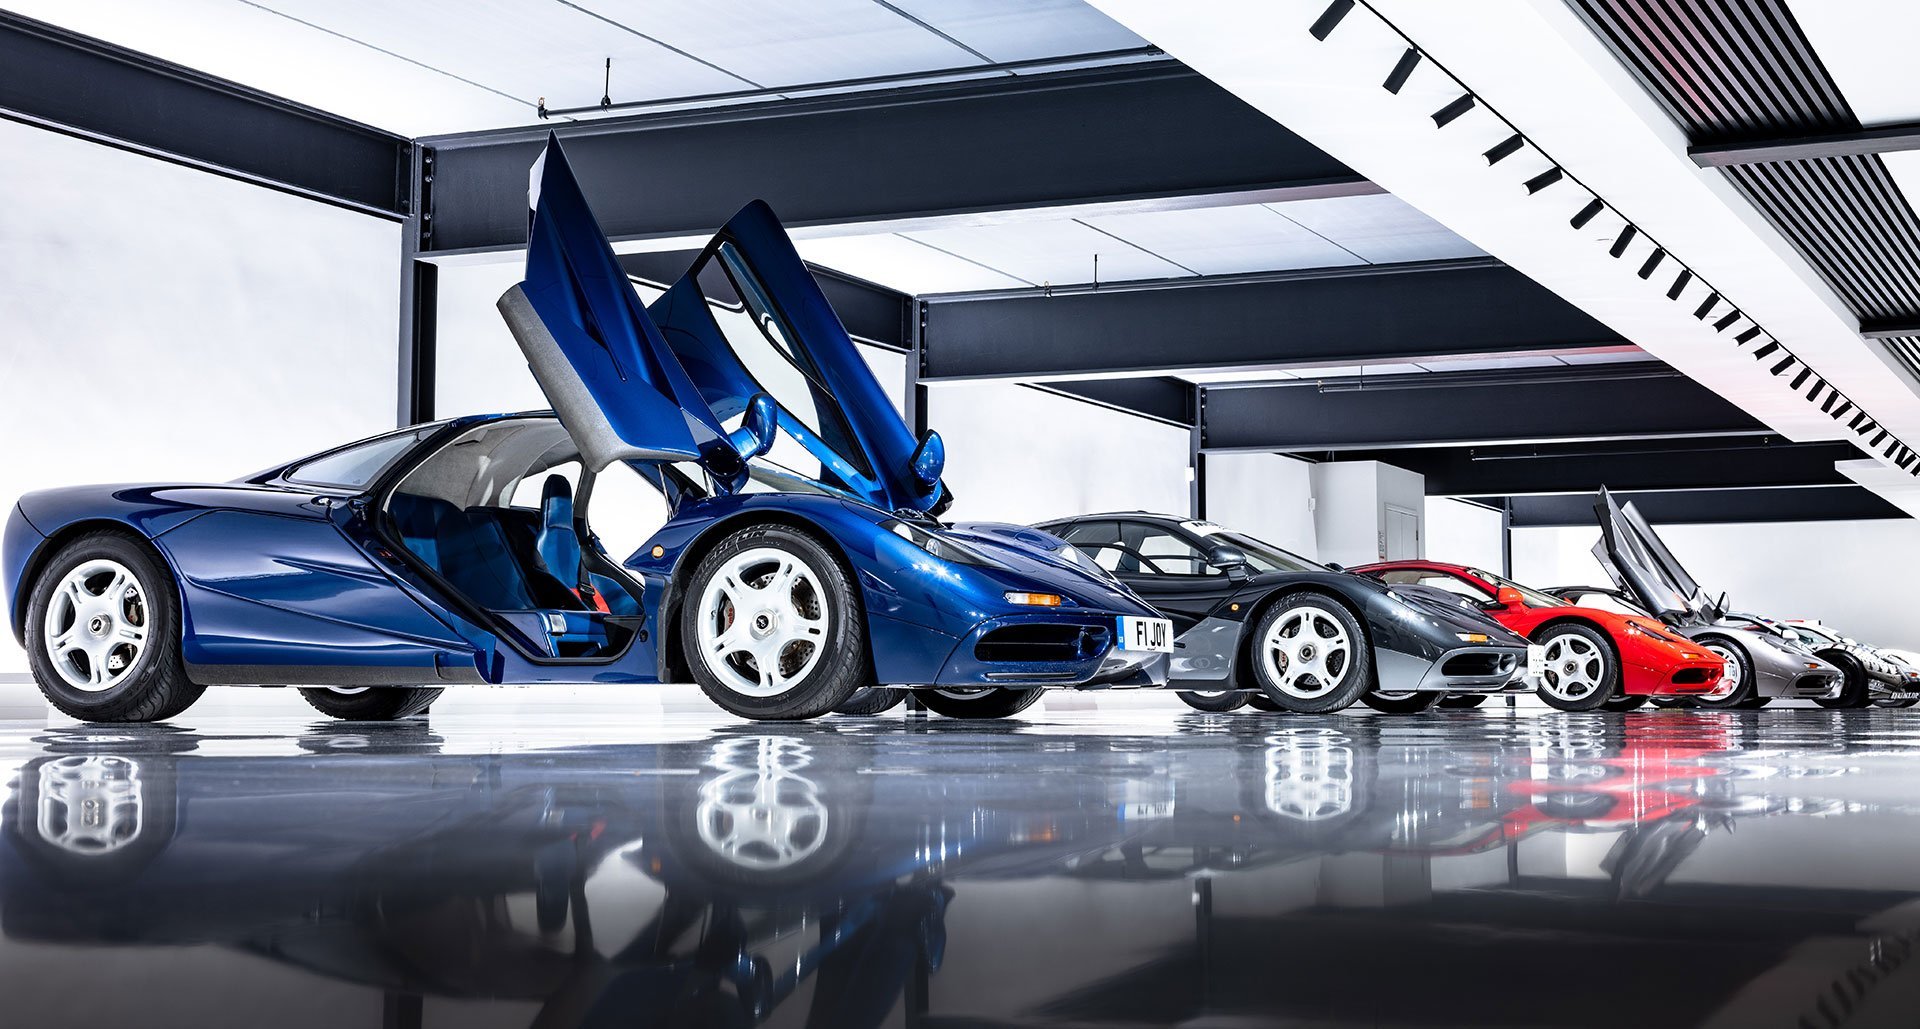 Tales of the unexpected: 30 years of the McLaren F1